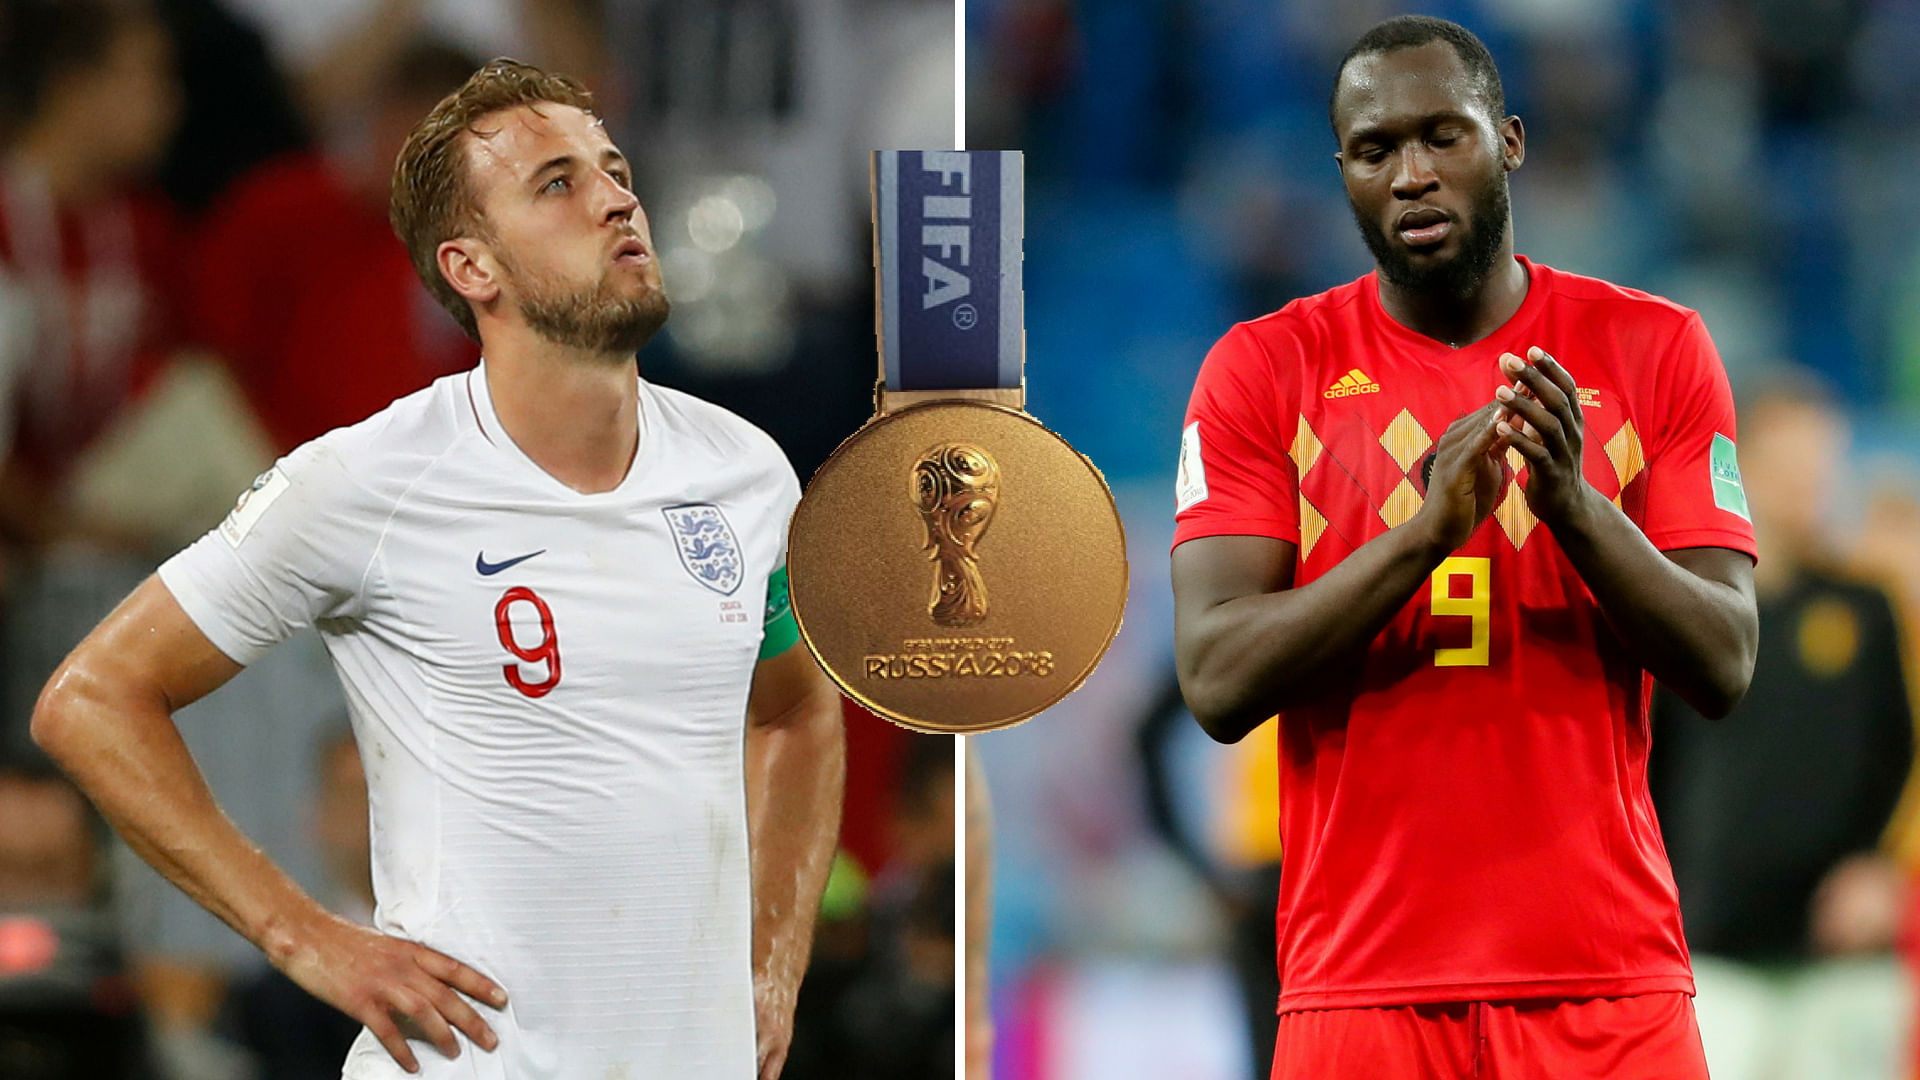 Harry Kane (left) and Romelu Lukaku had dismal semifinals, but both compete for the Golden Boot in the Bronze Medal match